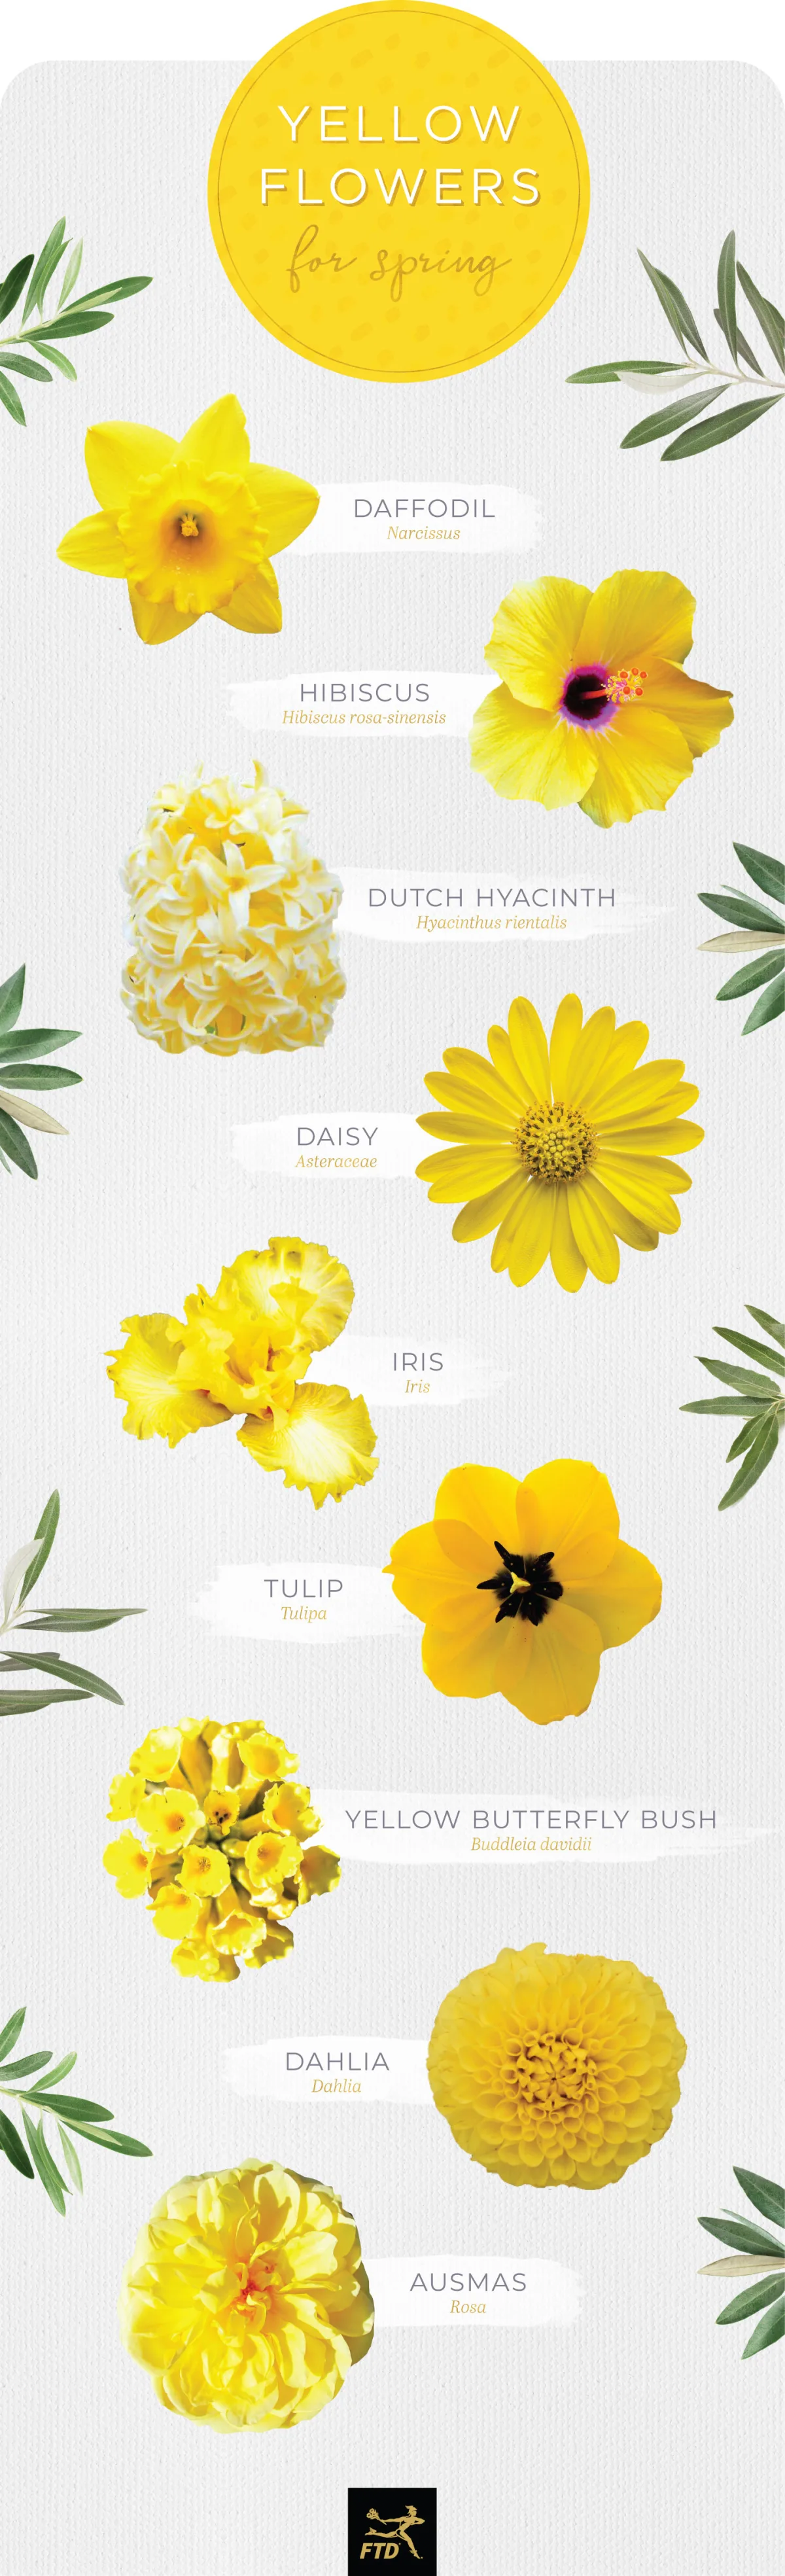 30 Types of Yellow Flowers - FTD.com